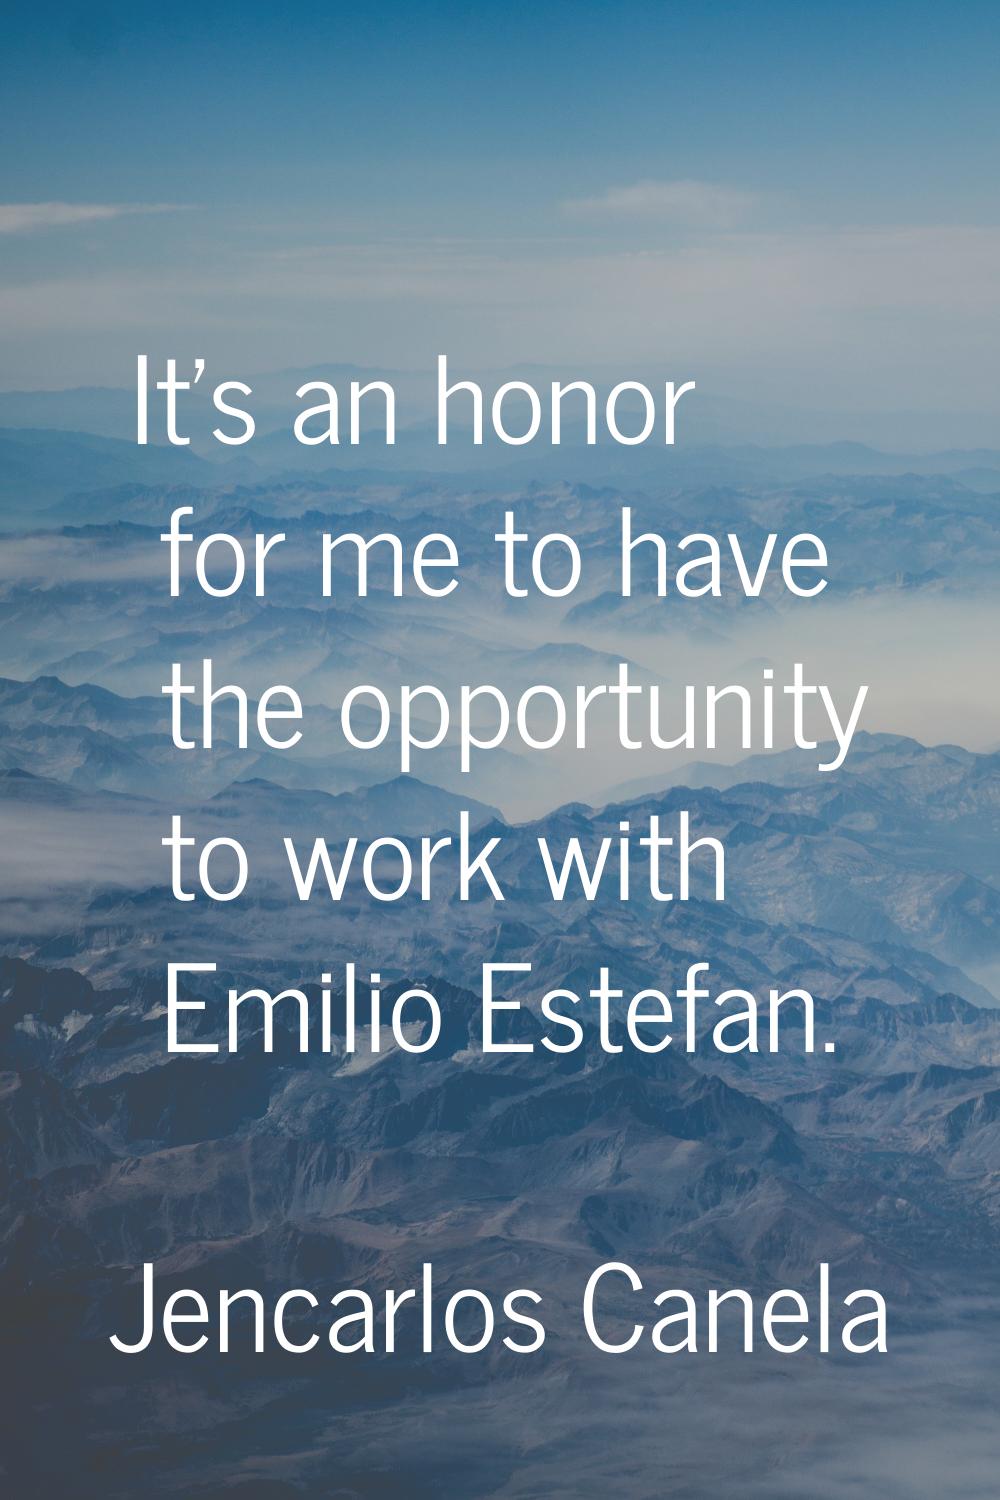 It's an honor for me to have the opportunity to work with Emilio Estefan.